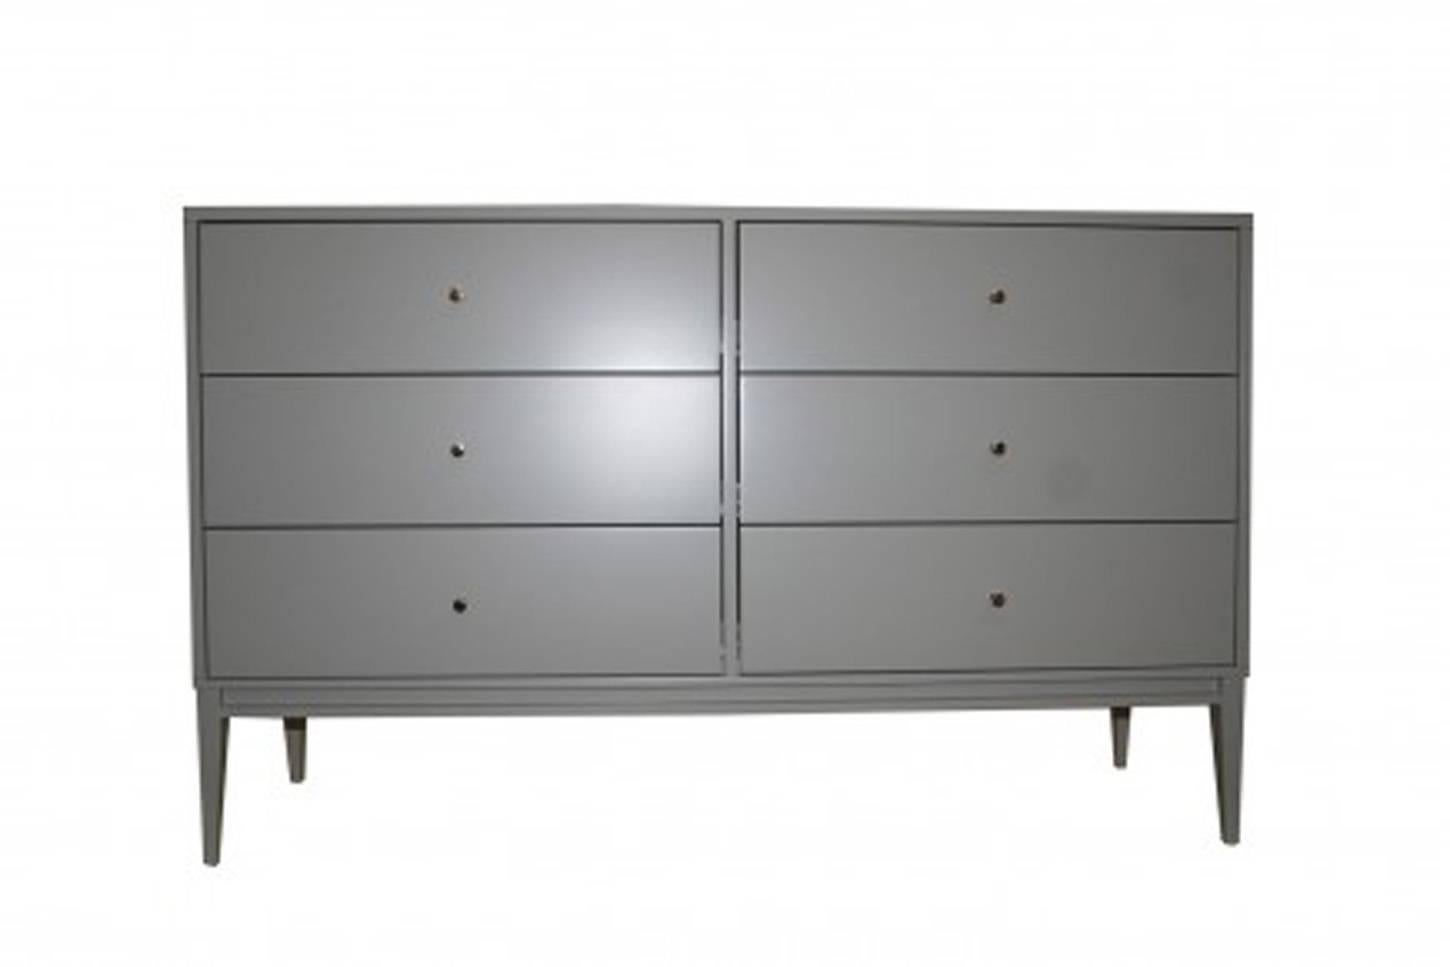 Six drawer lacquered dresser on tapered legs. Solid brass pulls, grey satin lacquer finish, solid maple construction.

Custom orders have a lead time of 10-12 weeks FOB NYC. Lead time contingent upon selection of finishes, approval of shop